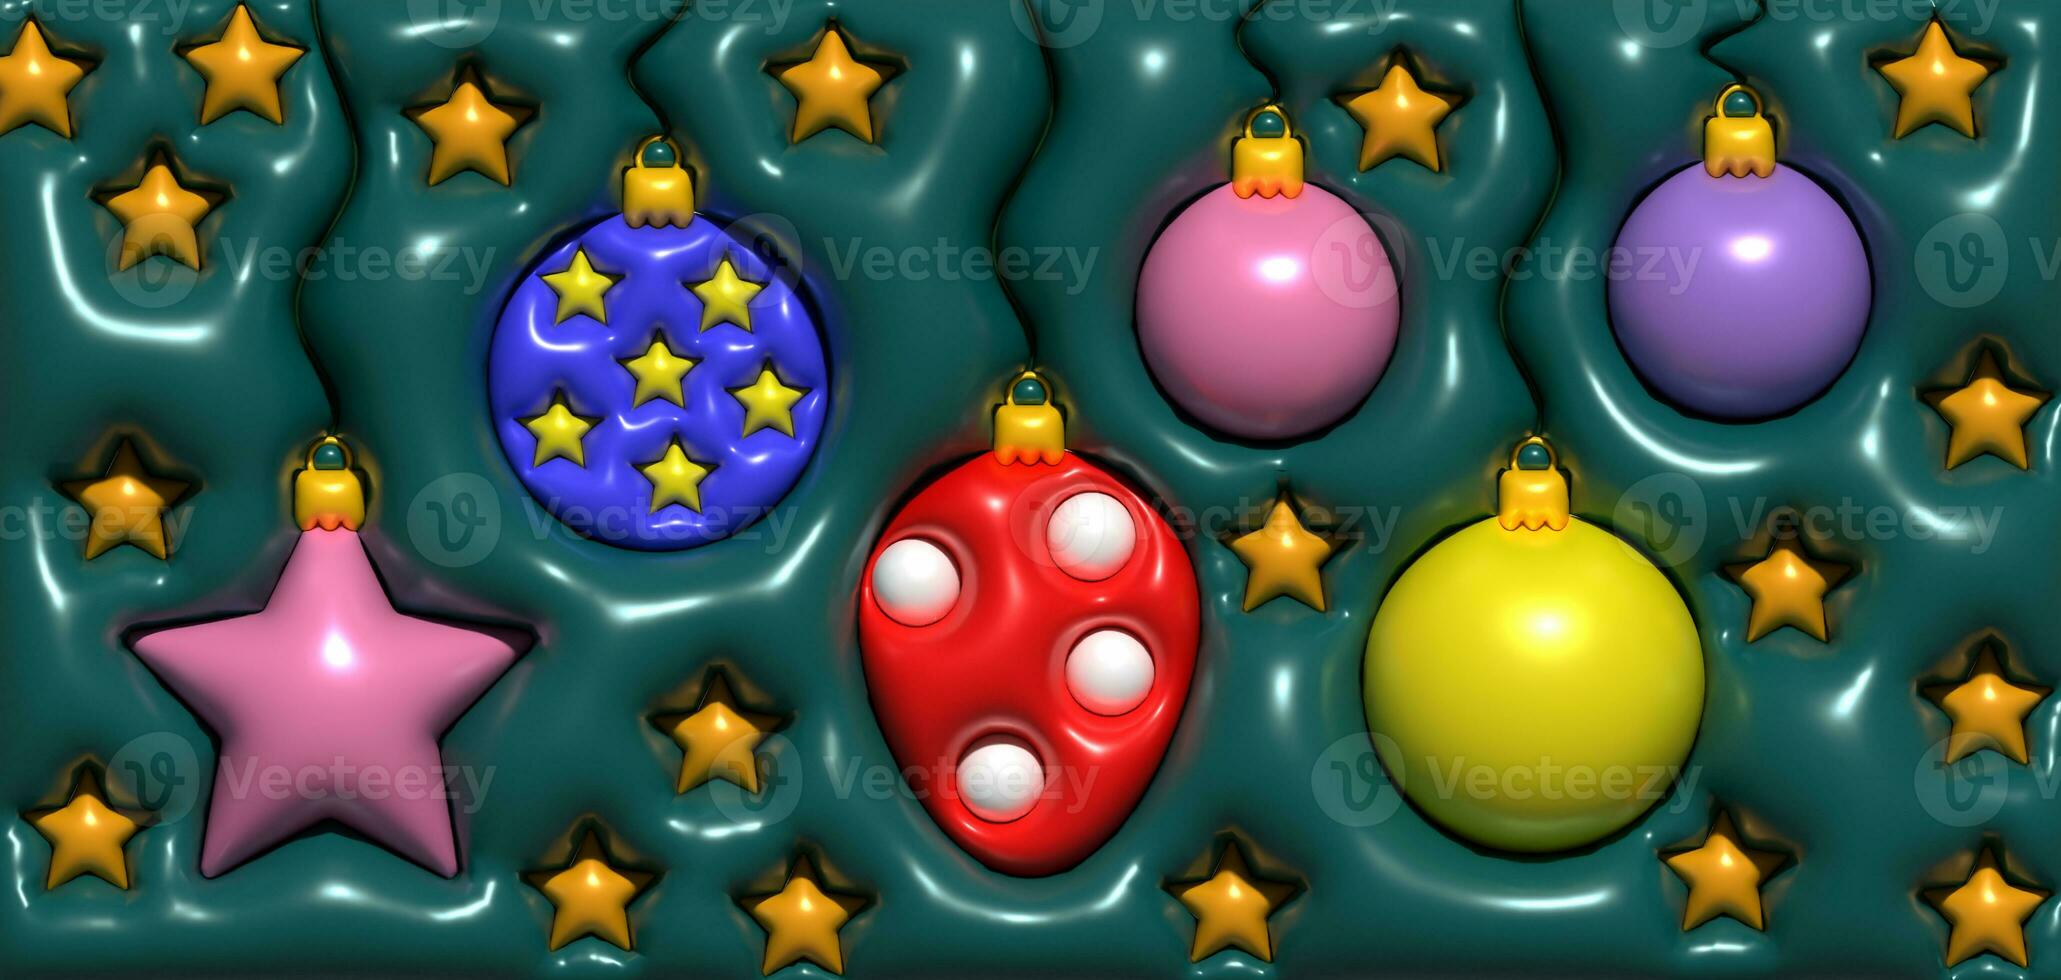 New Year's decor balls and figurines on a green background, 3D rendering illustration photo